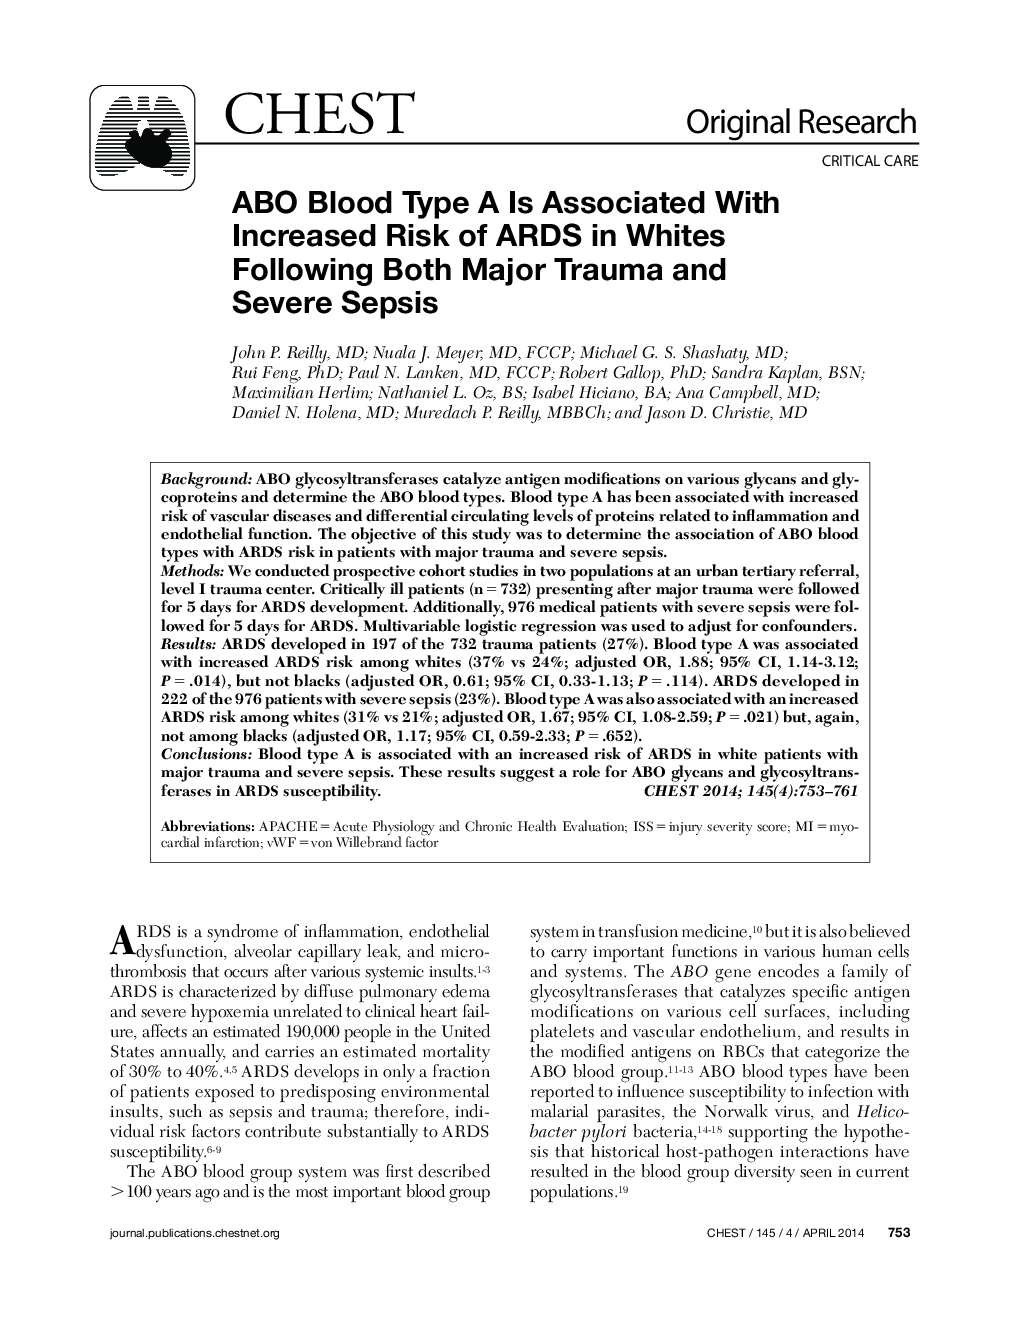 ABO Blood Type A Is Associated With Increased Risk of ARDS in Whites Following Both Major Trauma and Severe Sepsis